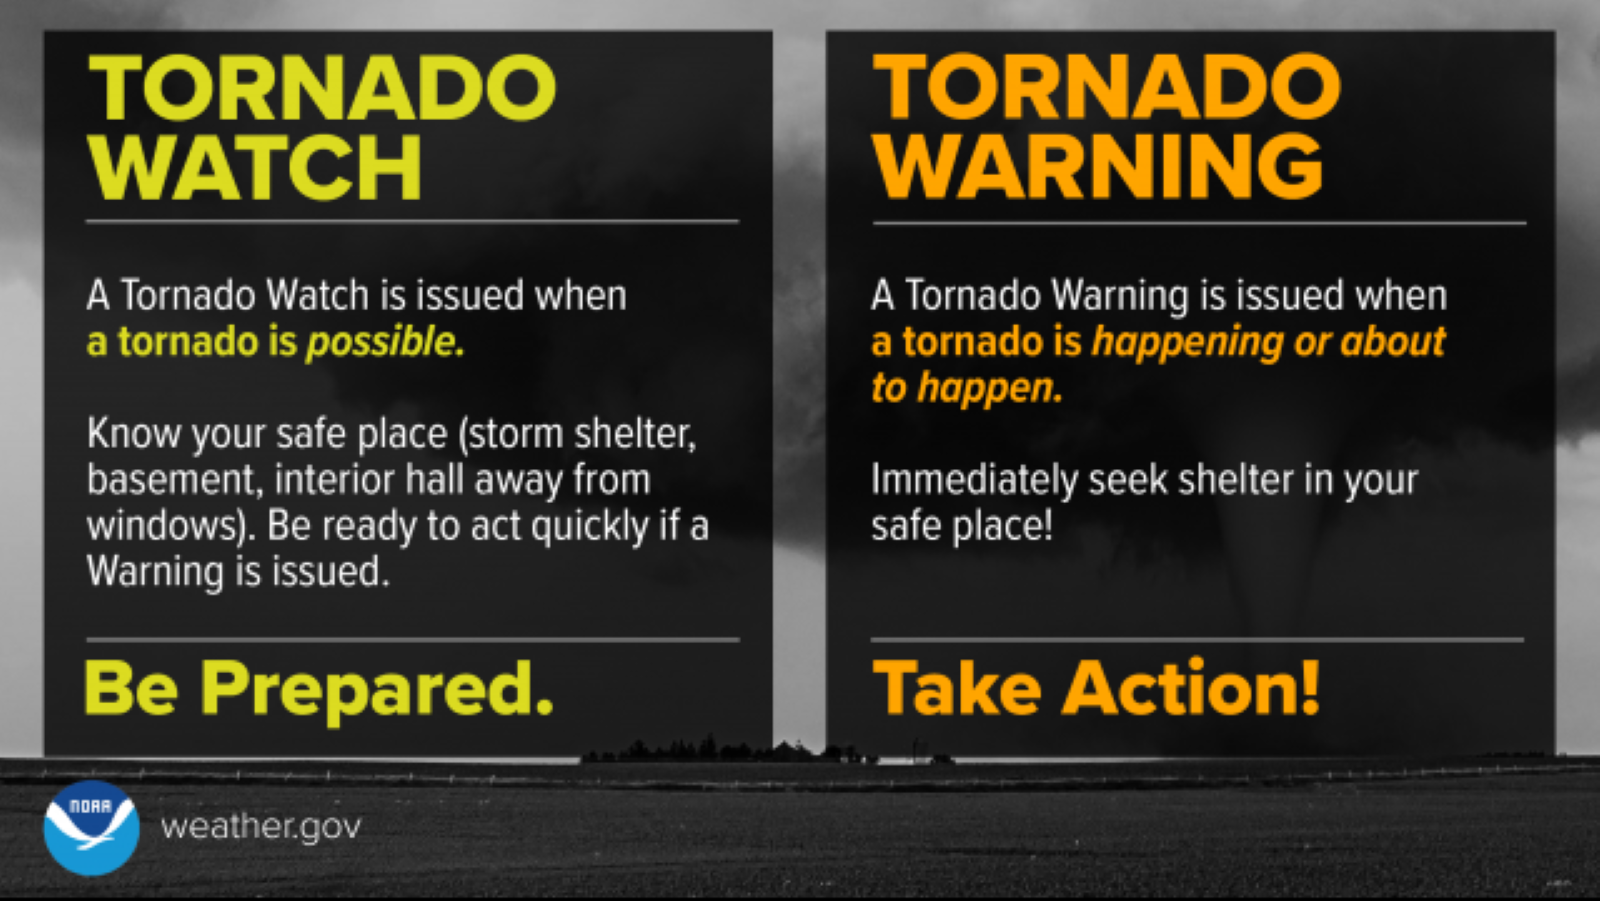 A tornado watch is issued when a tornado is possible. Be prepared. A tornado warning is issued when a tornado is happening or about to happen. Take action.